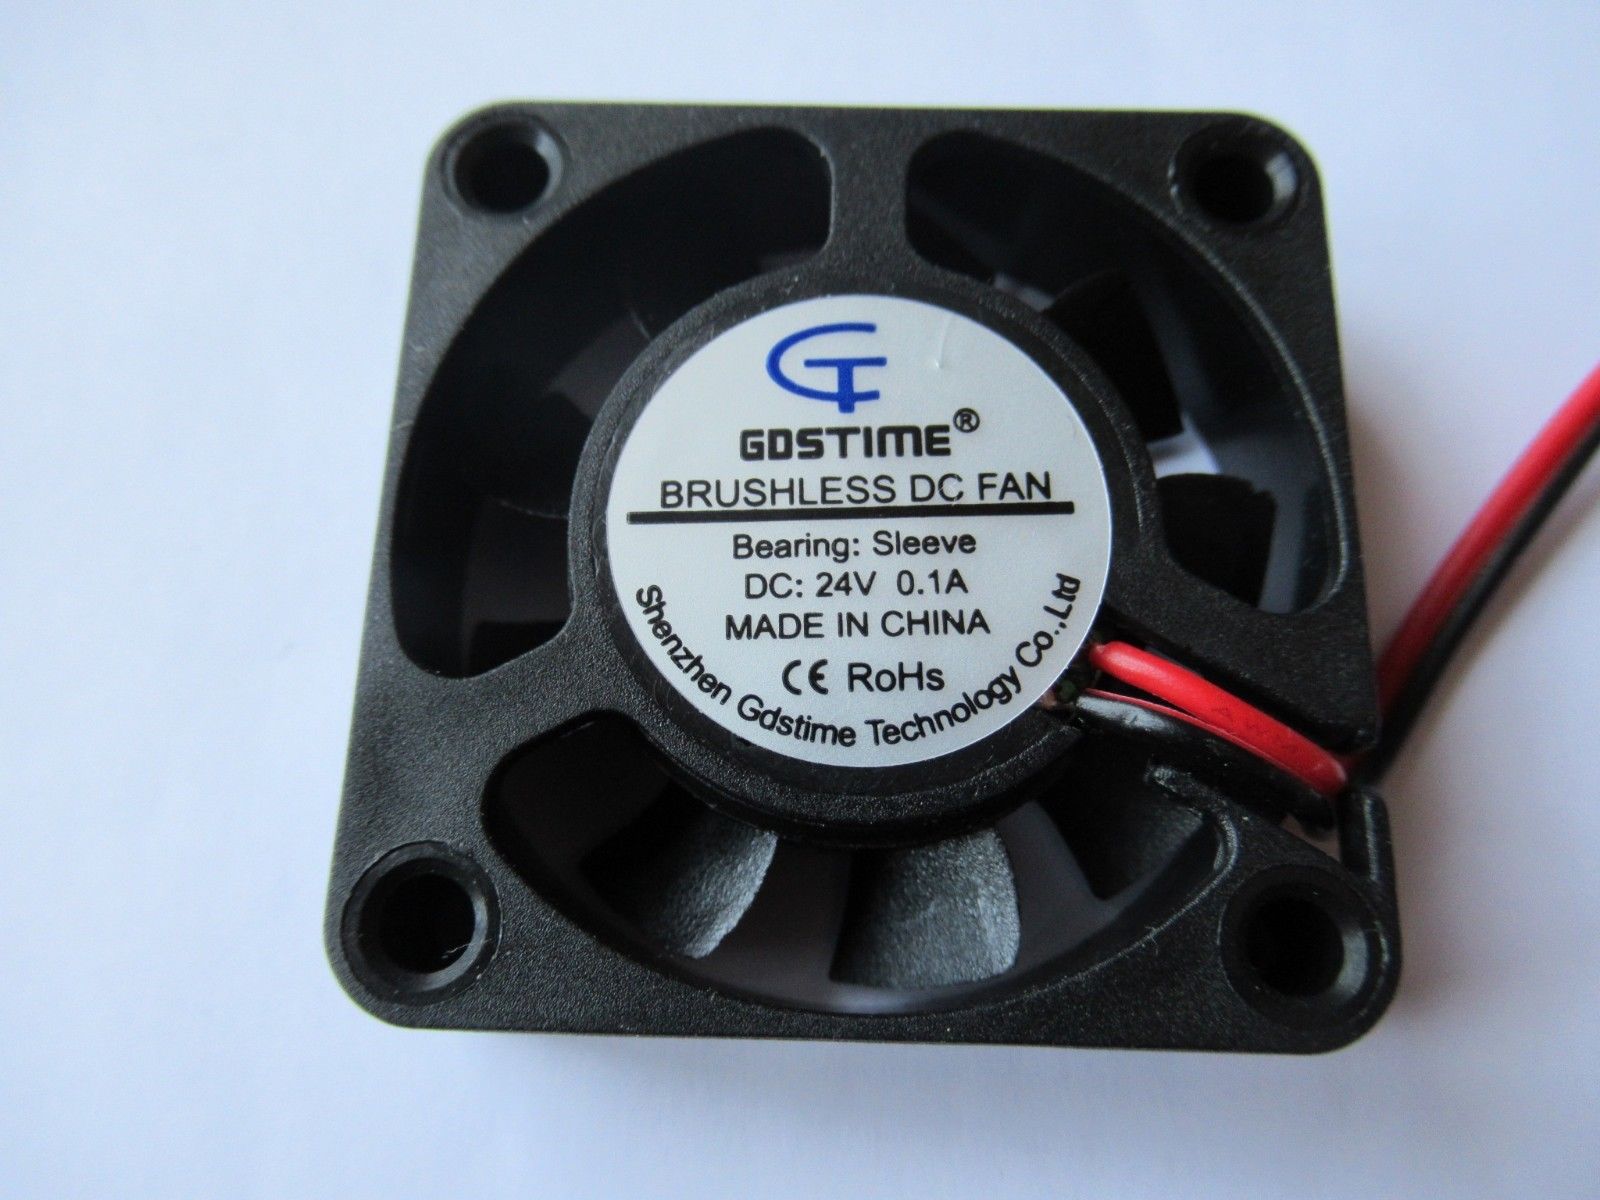 DC 24V 0.1A DC Fans 40mm 40x40x10mm Brushless Computer Cooling Fan 4010s